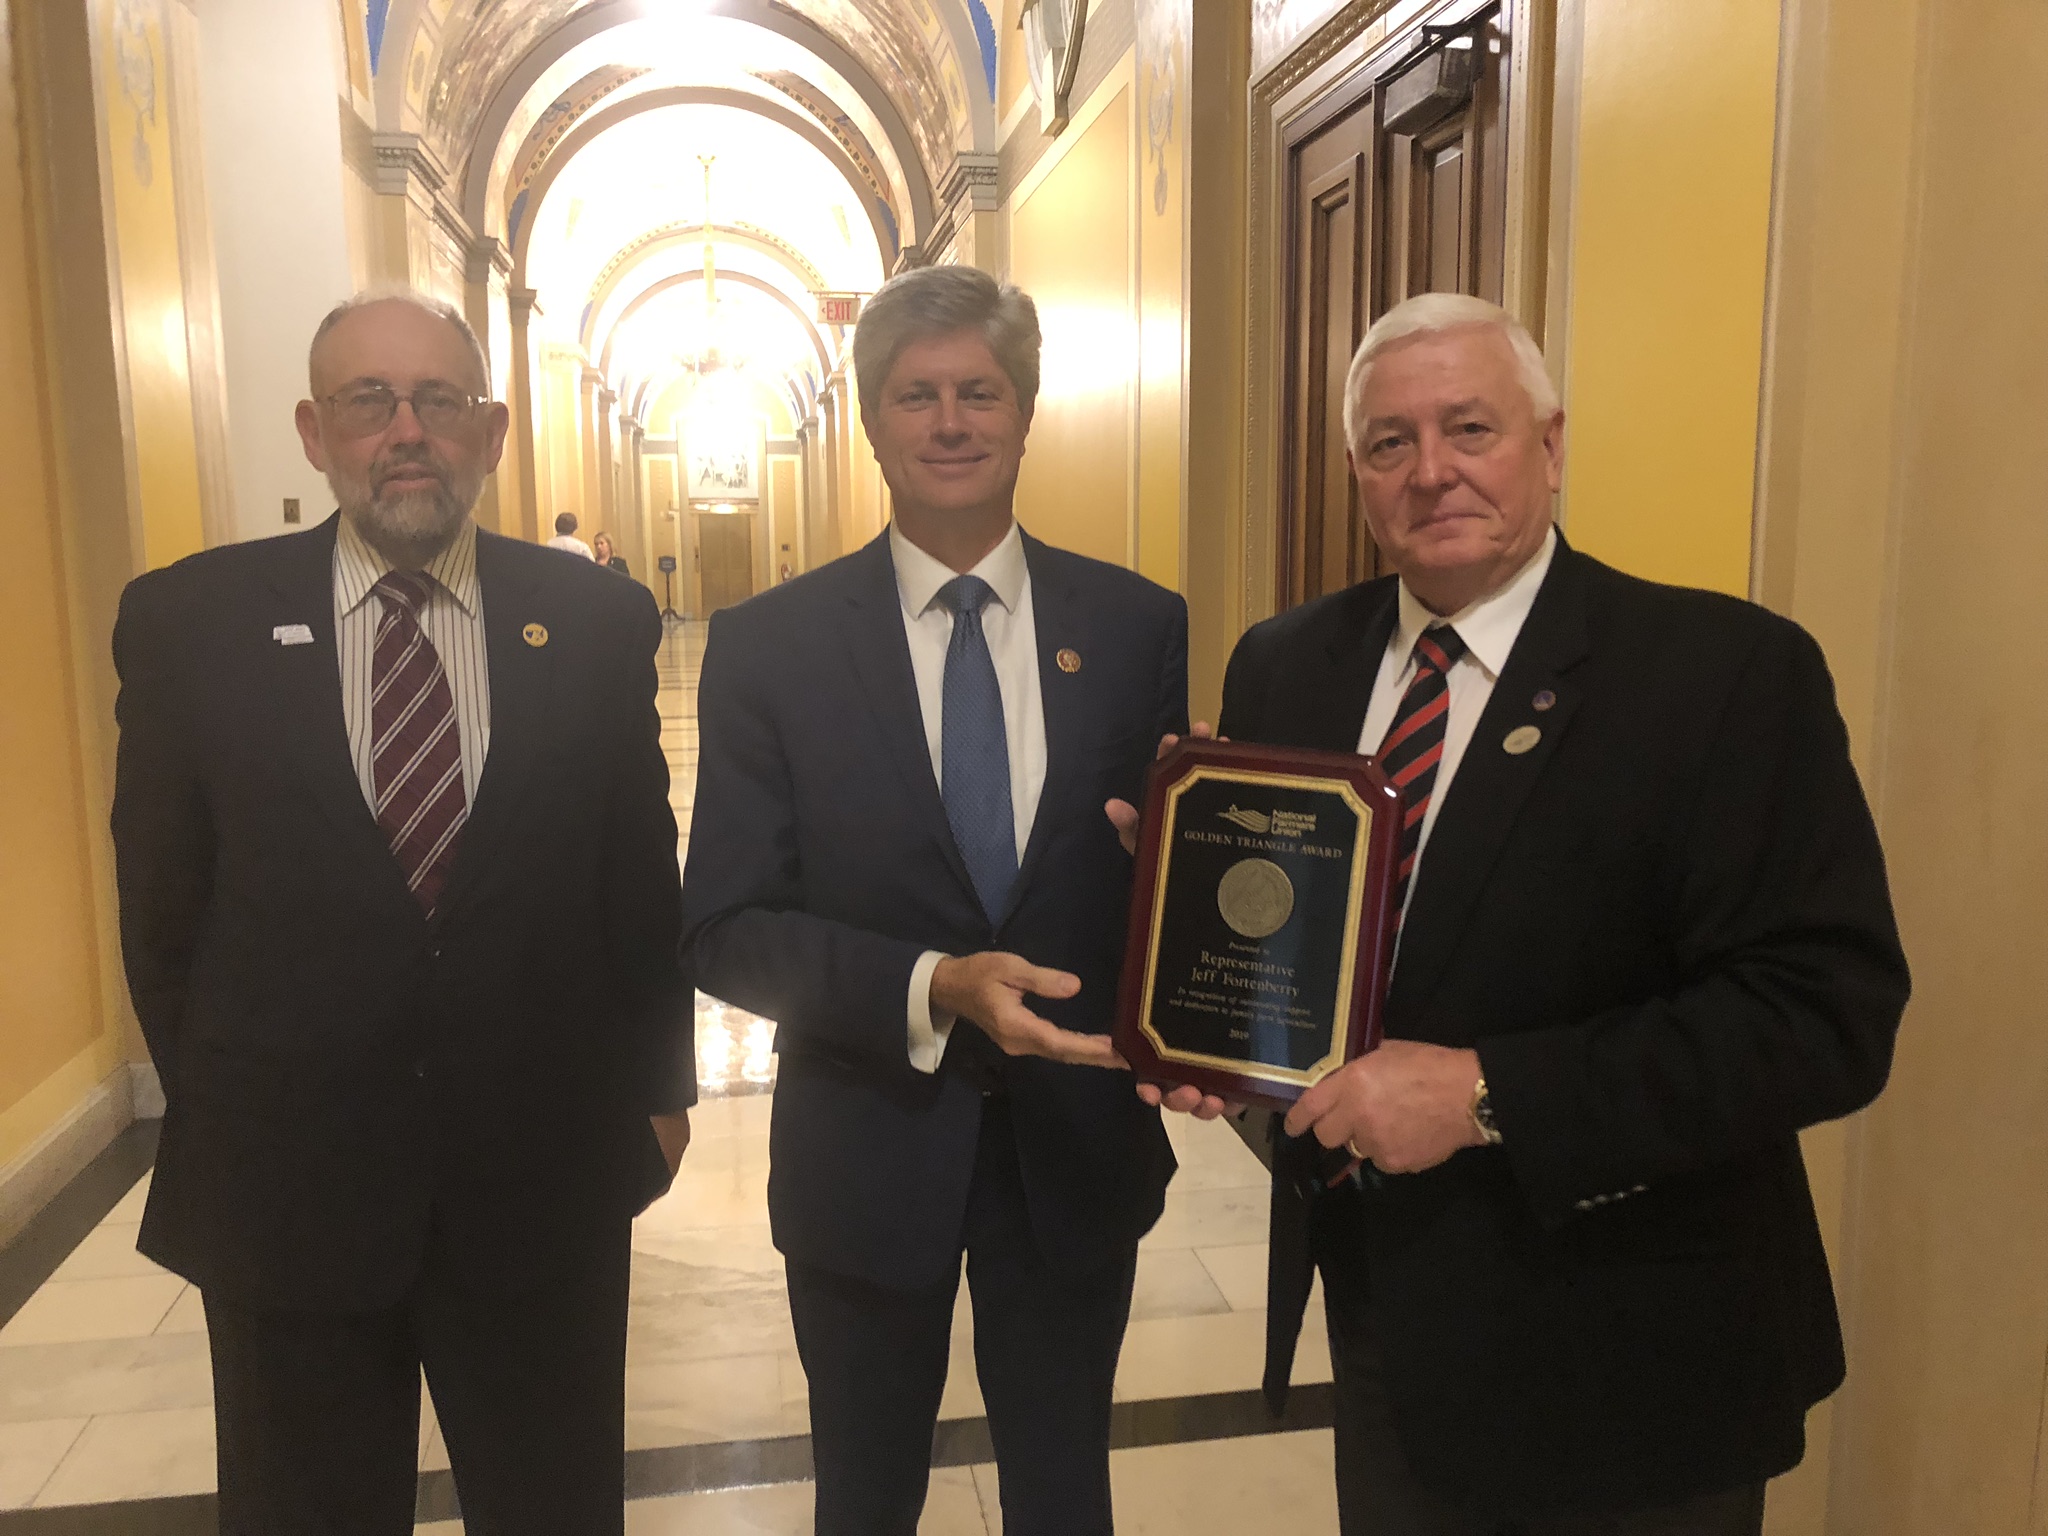 Representative Jeff Fortenberry Receives Golden Triangle Award  From Farmers Union